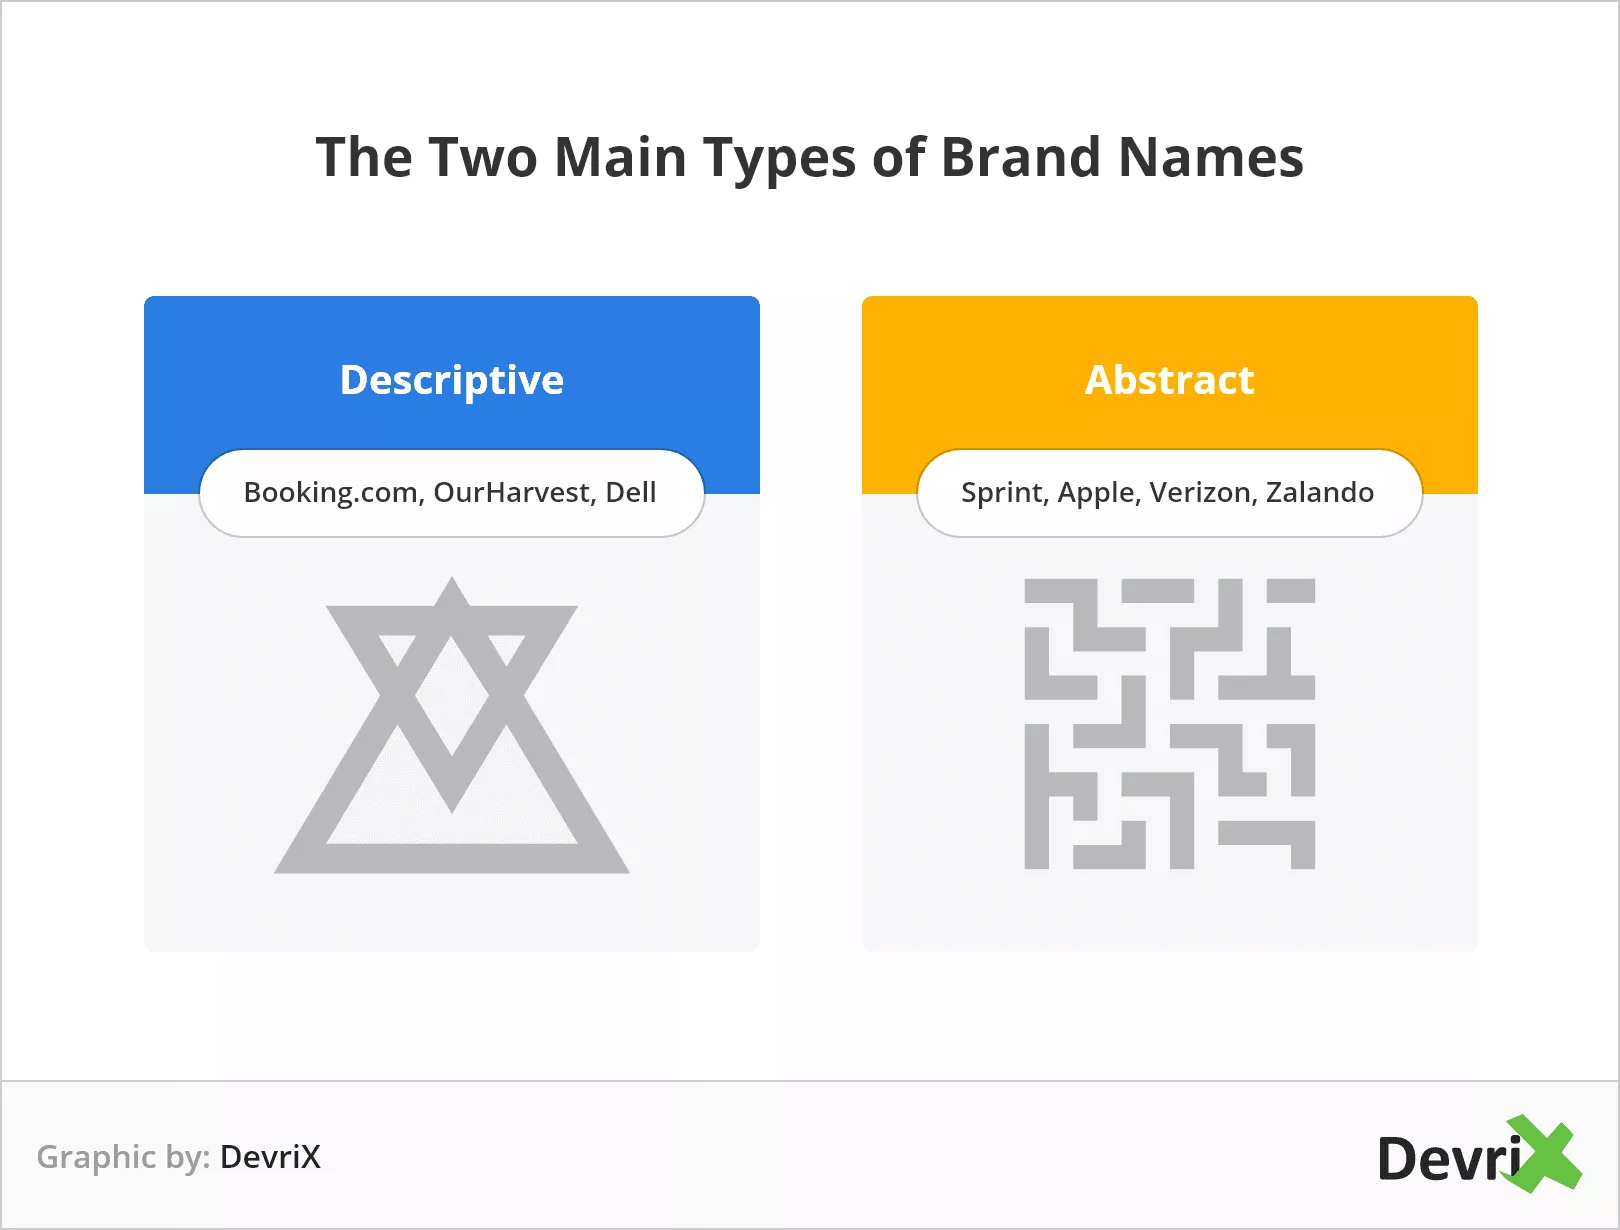 The Two Main Types of Brand Names